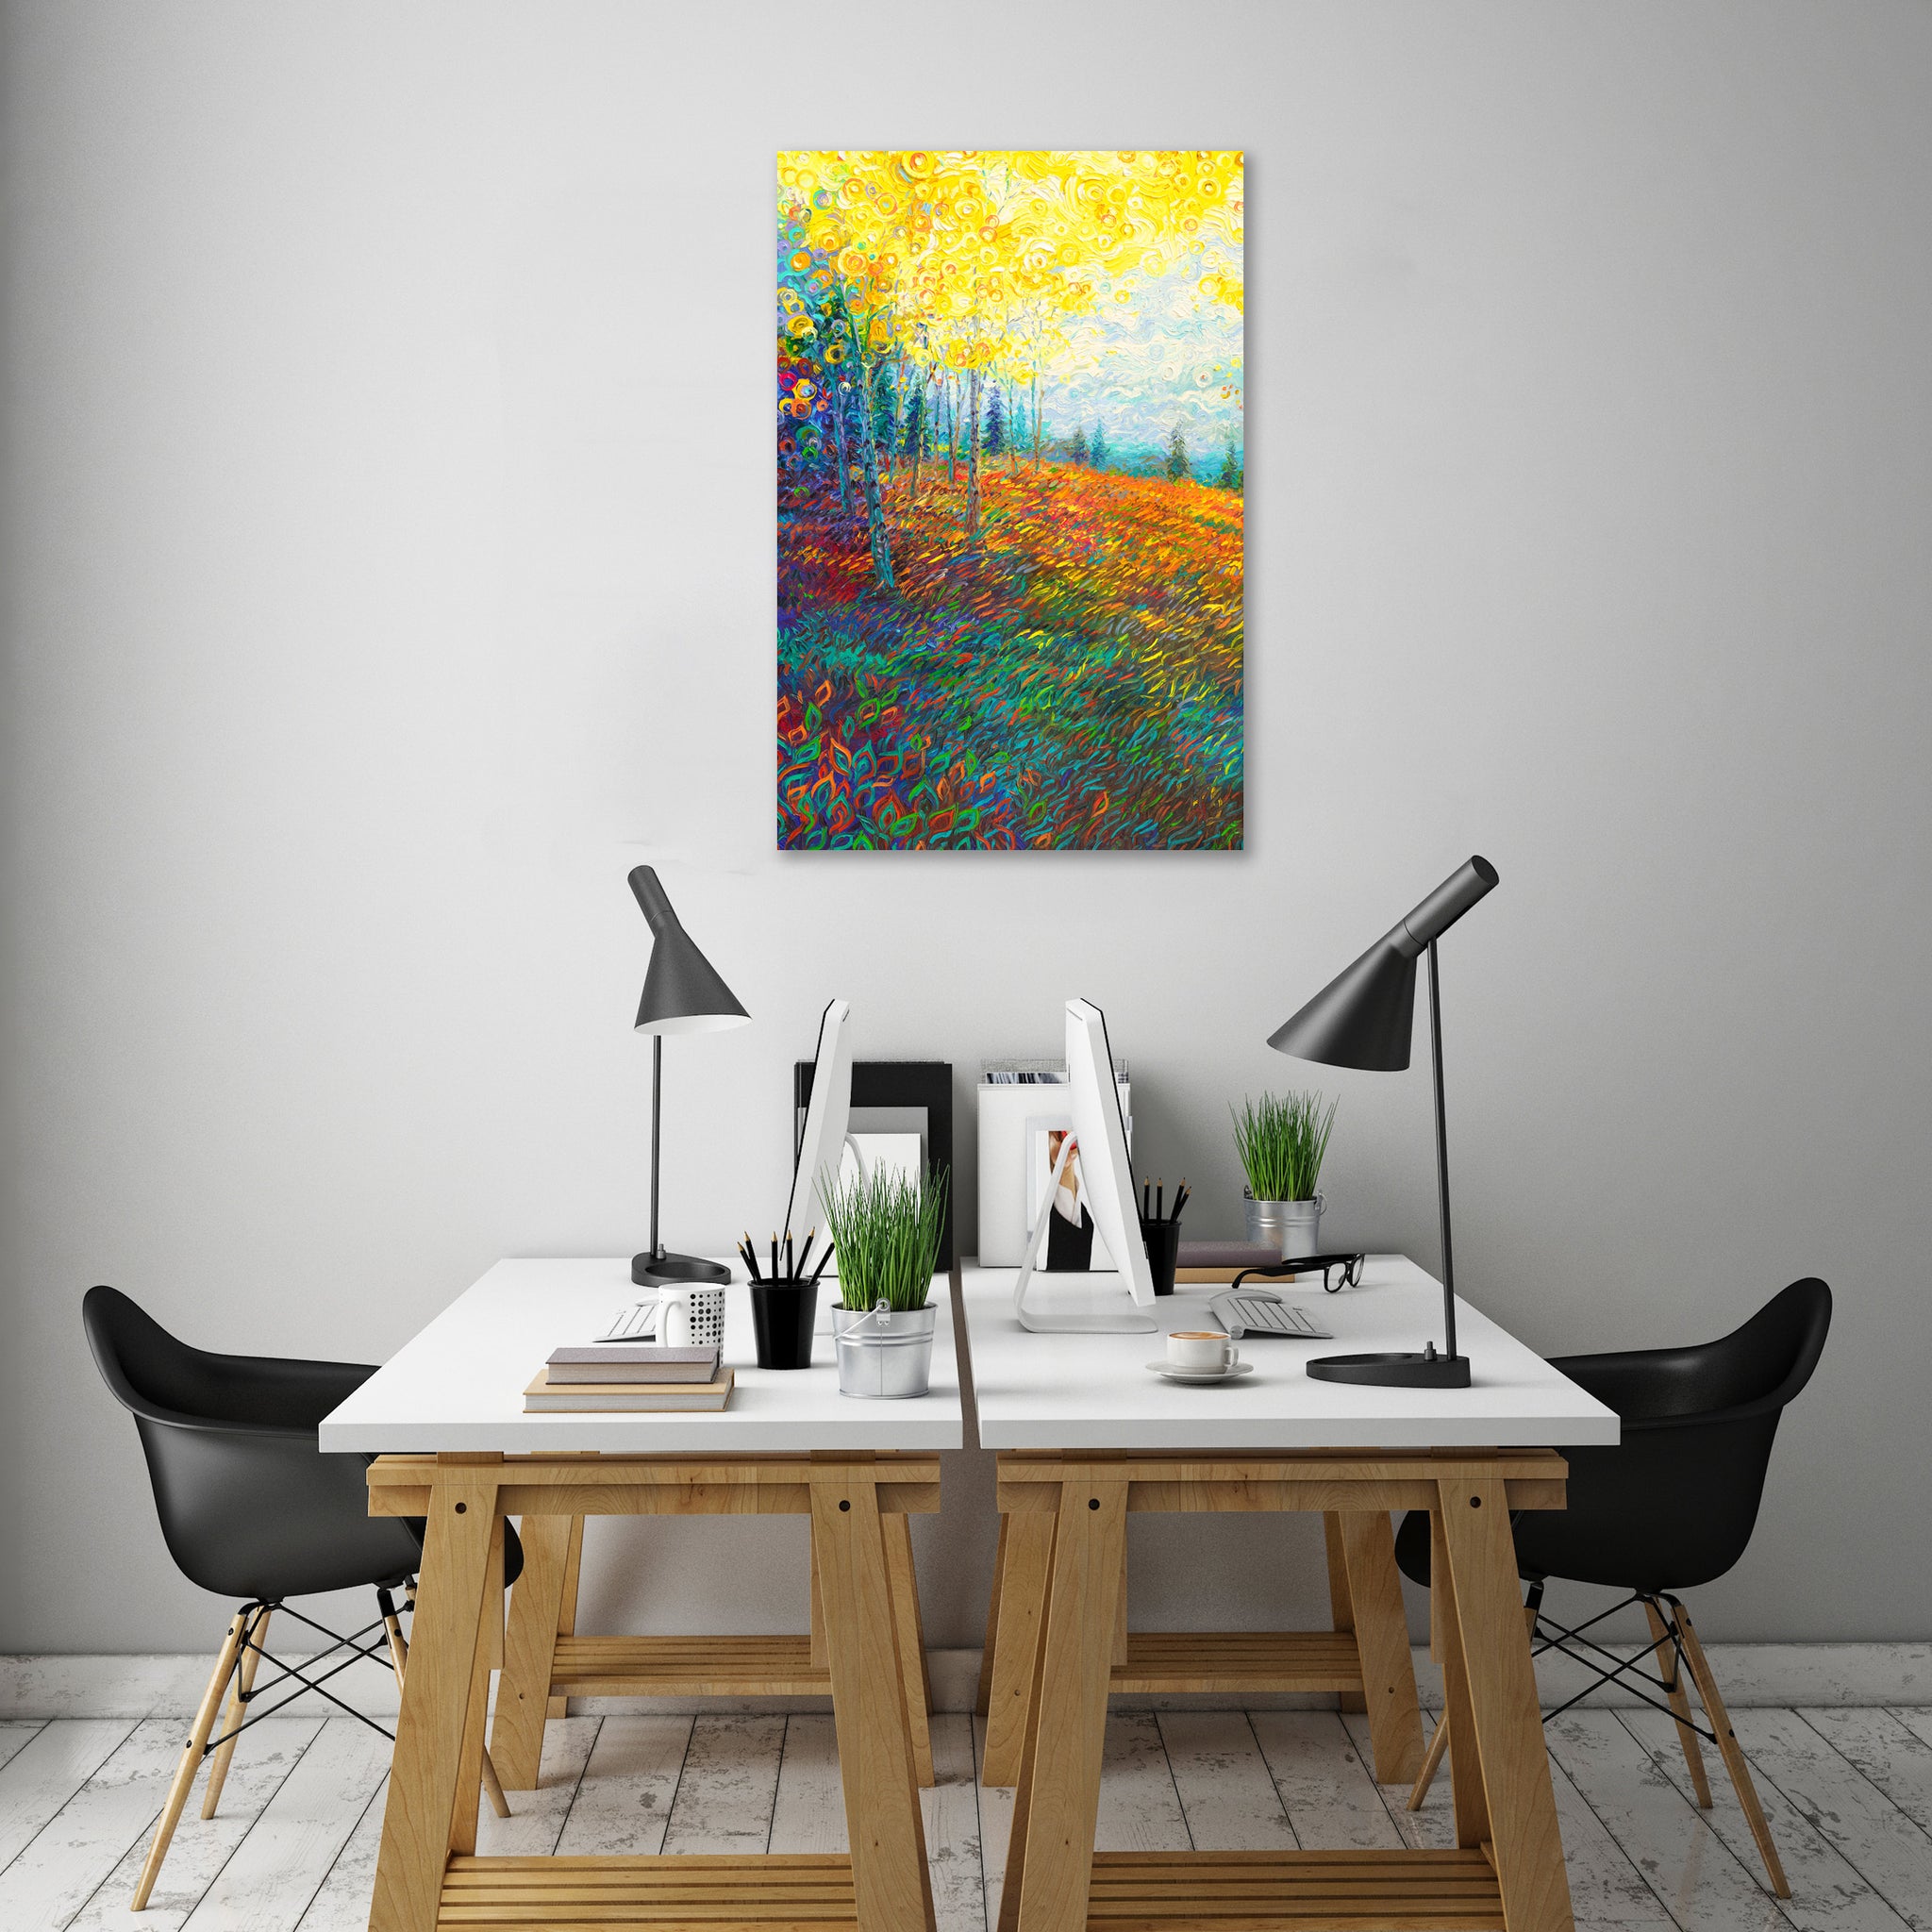 Equilibrium by Iris Scott - Gallery Wrapped Canvas Print